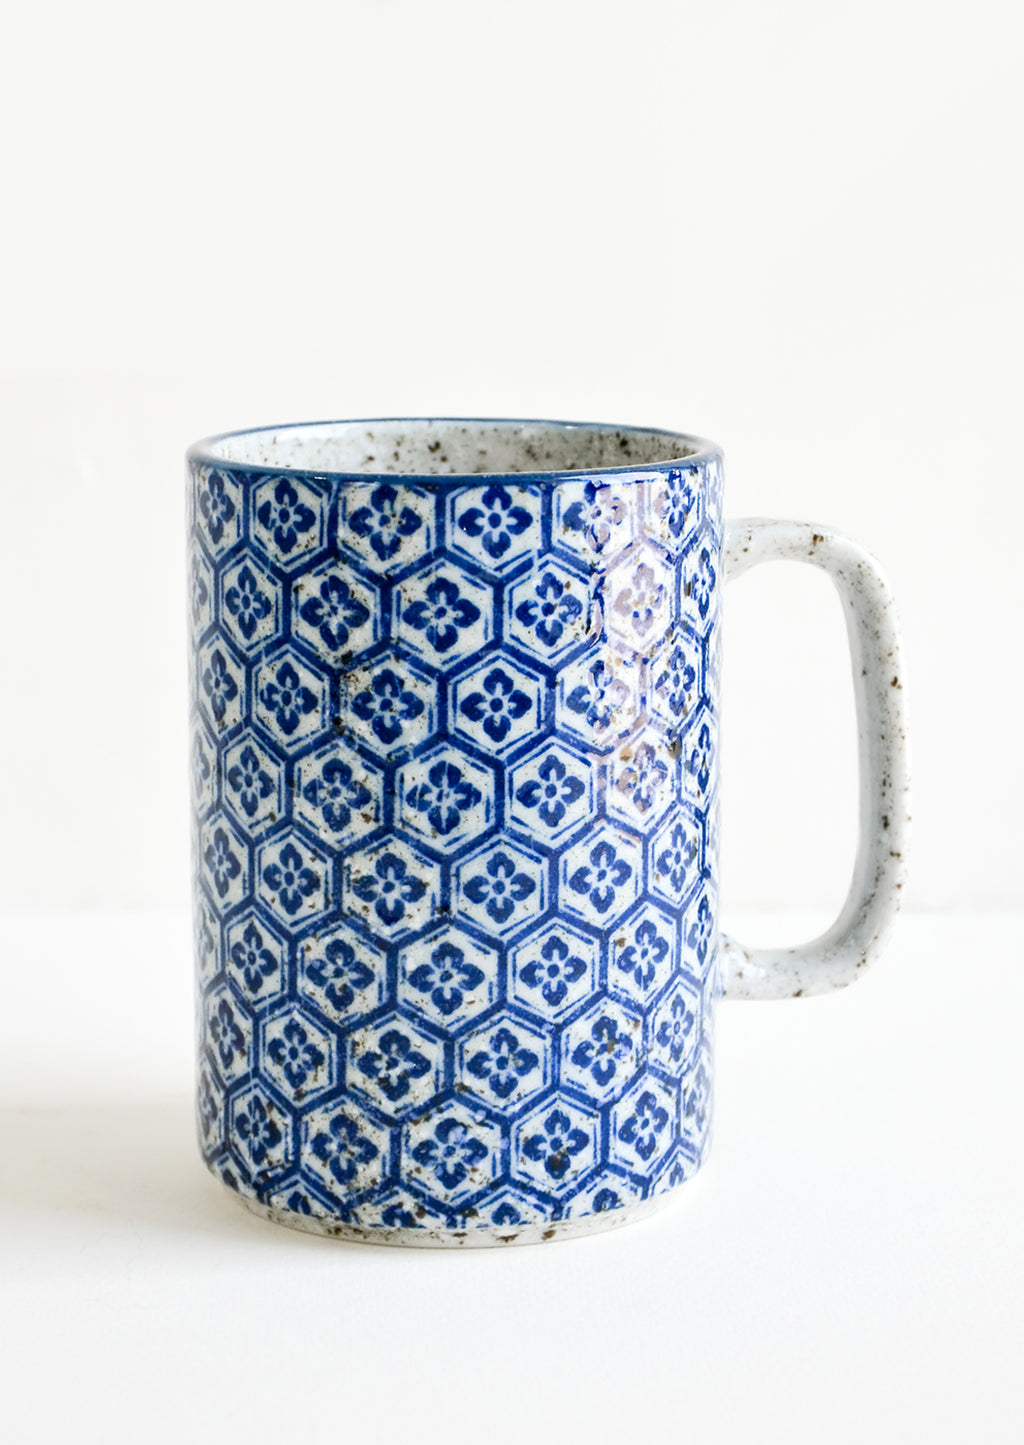 Hexagonal Floral: A tall mug with handle made from speckled grey ceramic with hexagonal indigo tile pattern throughout.